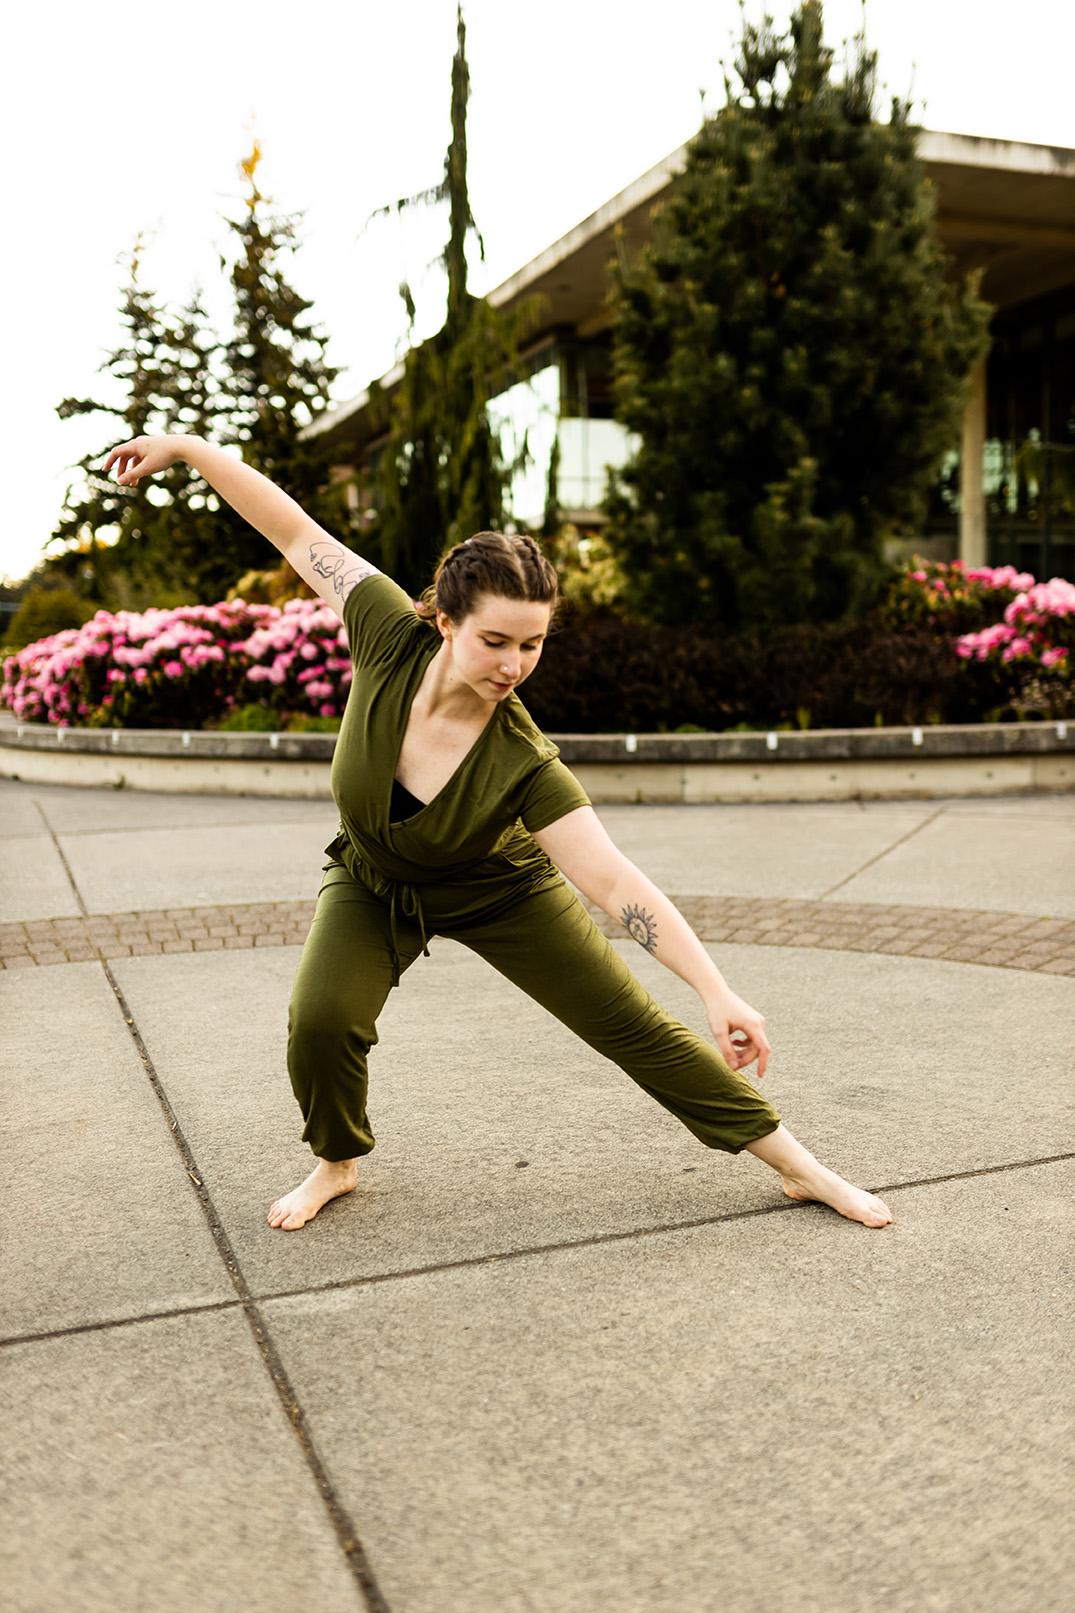 Chloe in a park setting, posing in a side lunge with one hand parallel to the outstretched leg and the other up in the air to form a straight line as she gazes at the ground